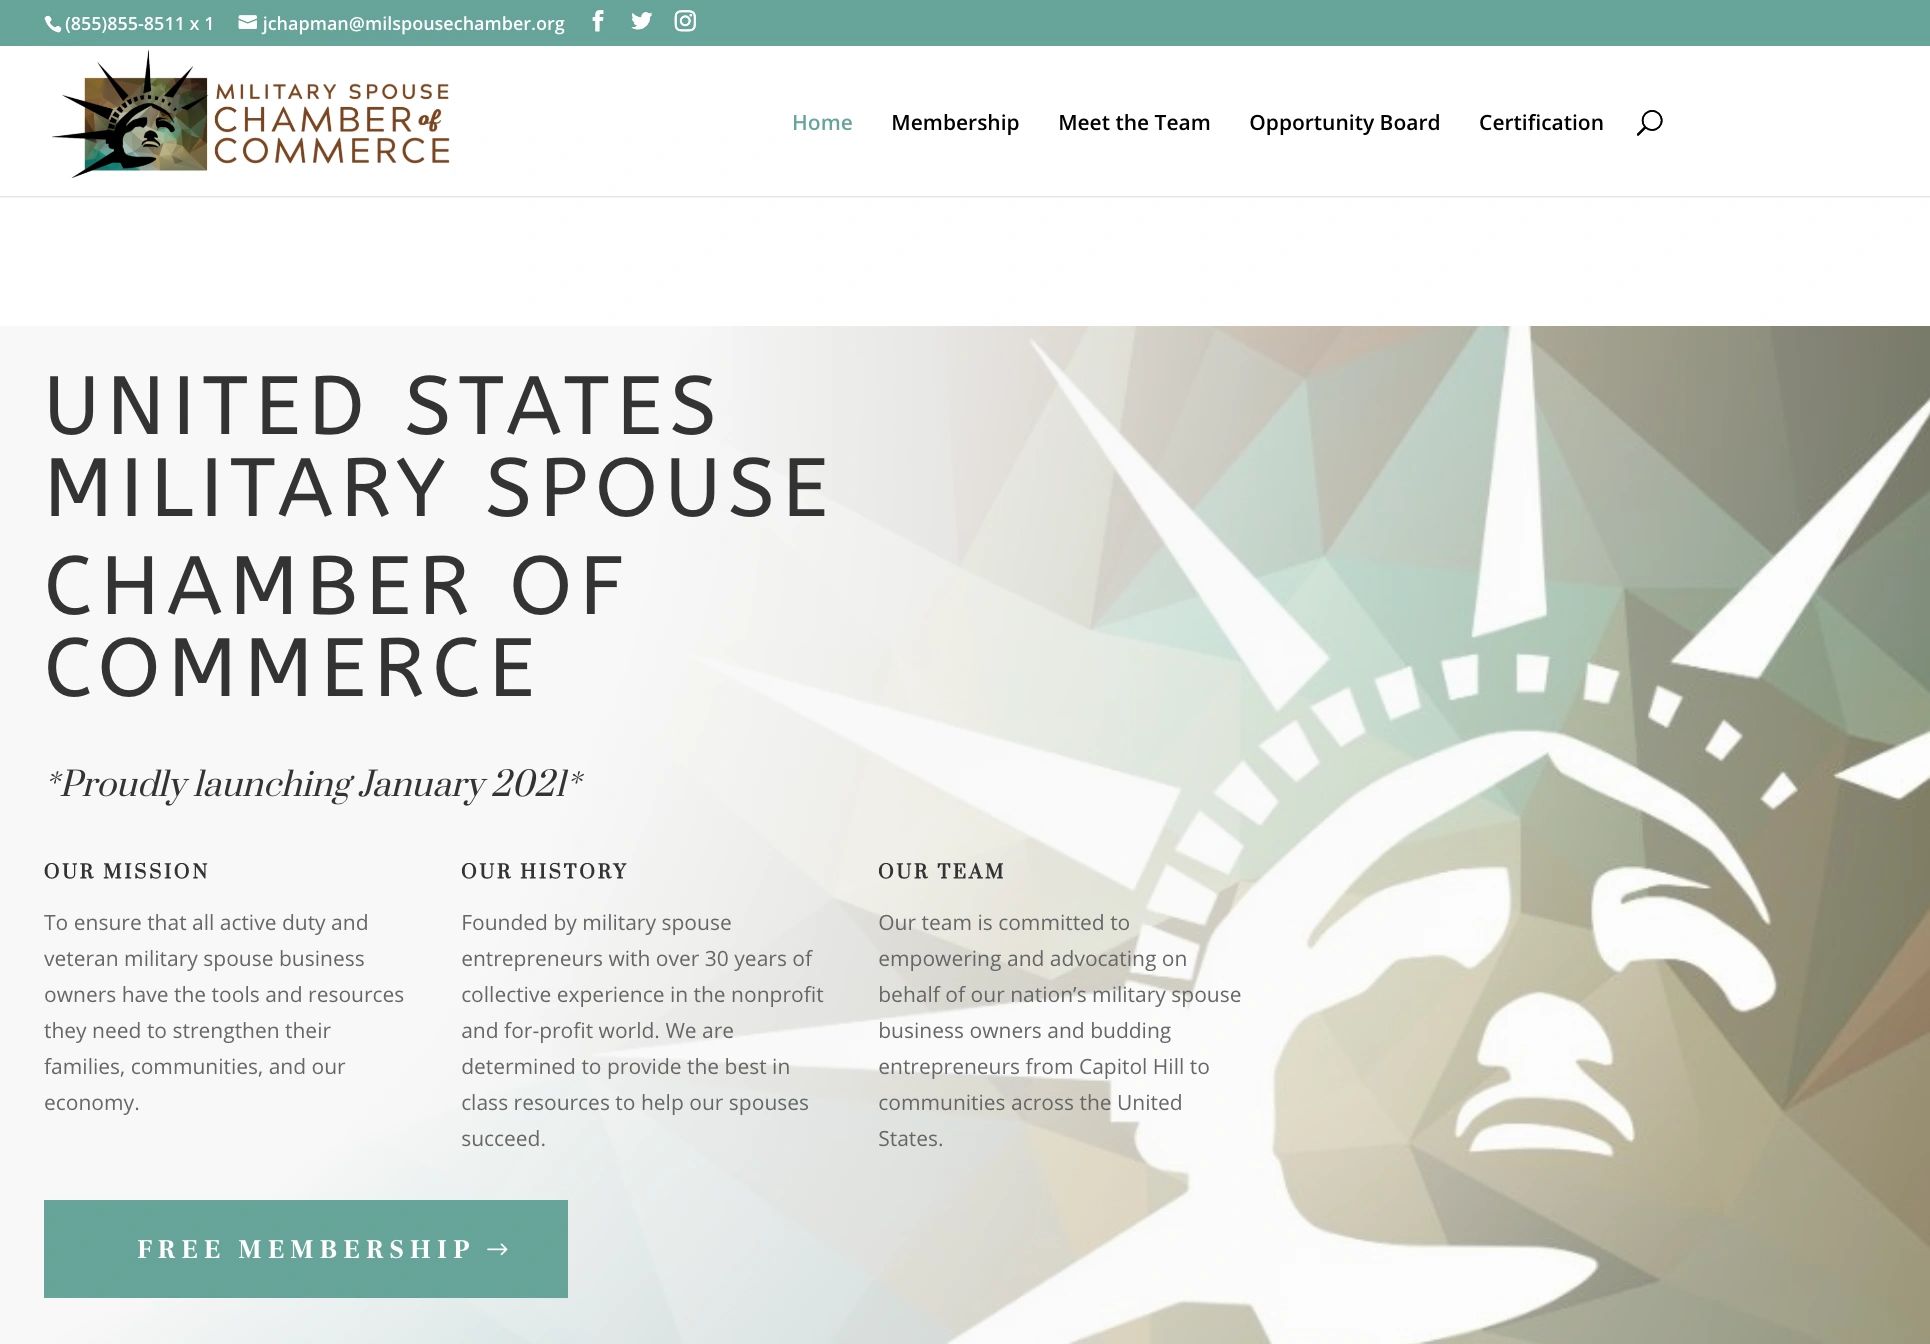 United States Military Spouse Chamber of Commerce Website Image